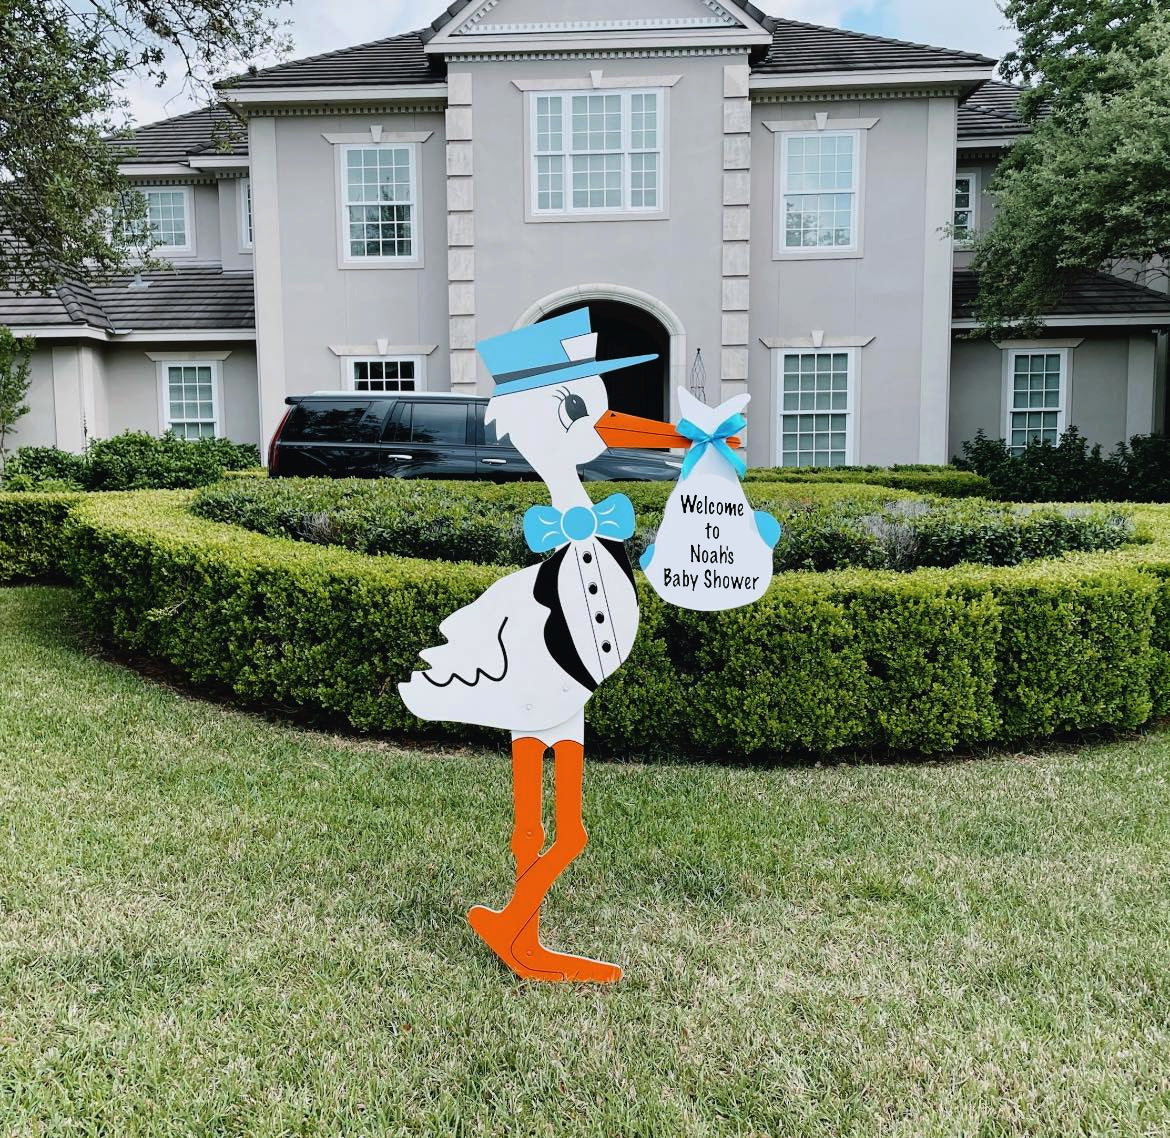 Blue stork welcoming guests to a baby shower hosted at a home